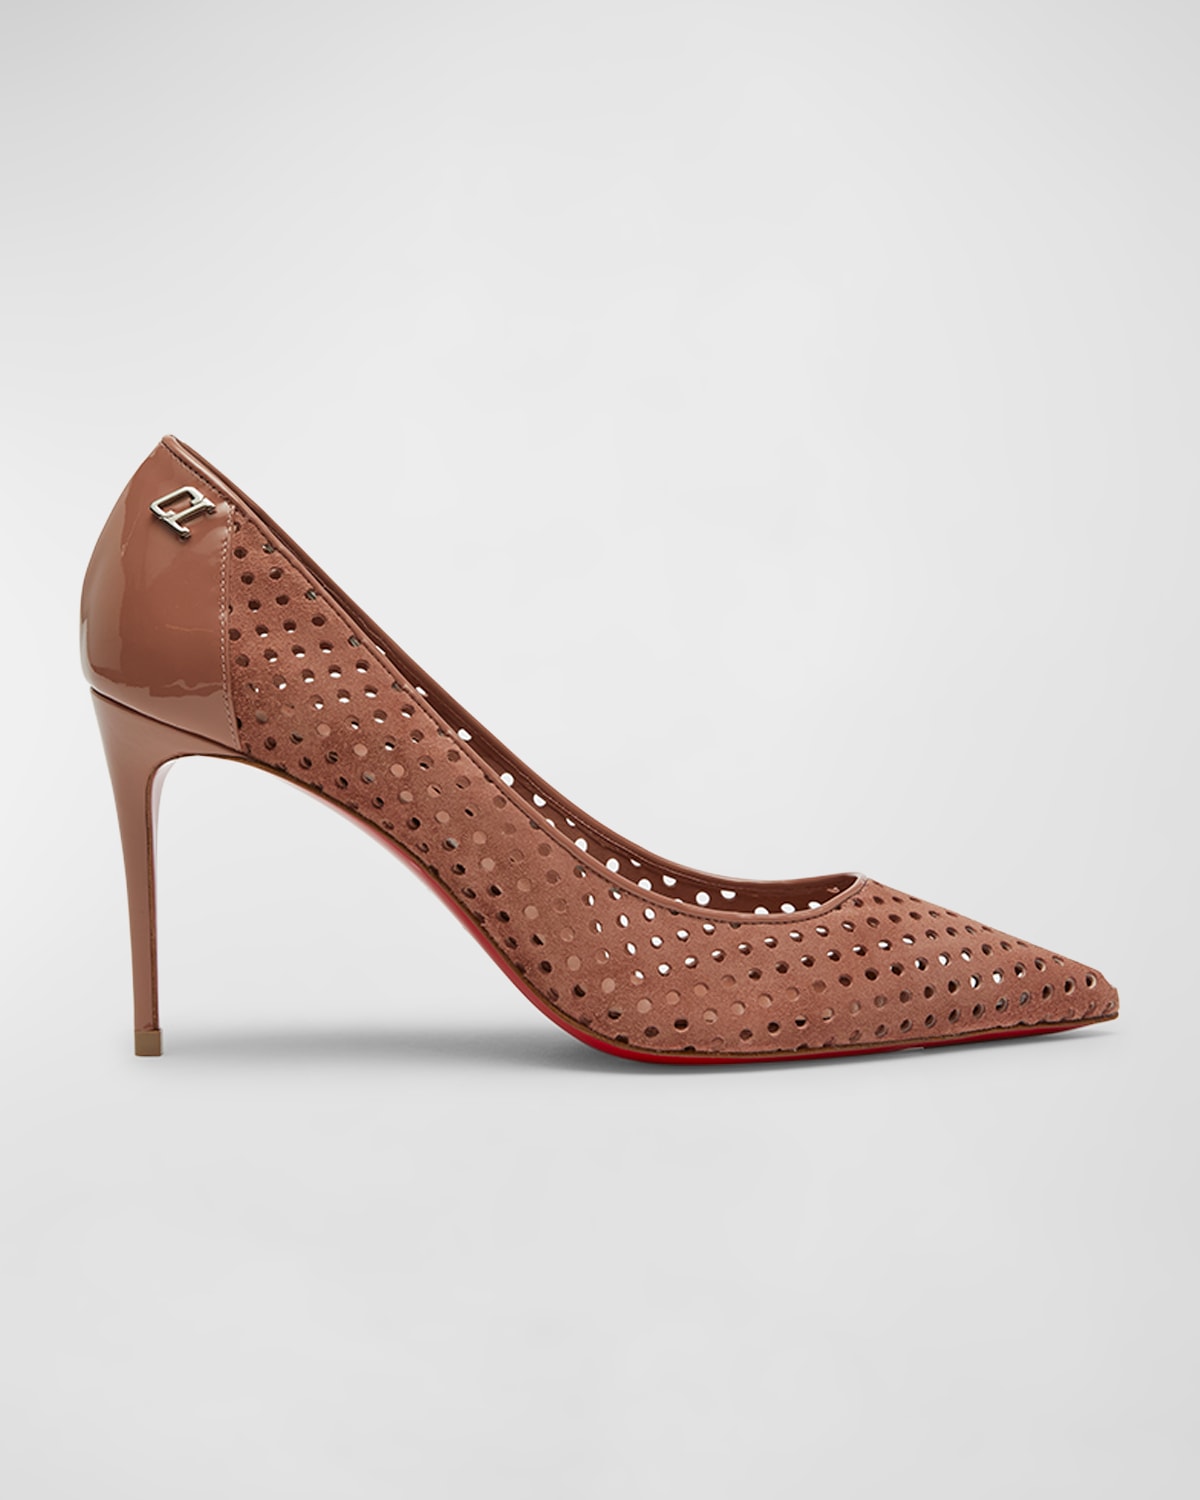 CHRISTIAN LOUBOUTIN KATE PERFORATED SUEDE RED SOLE PUMPS